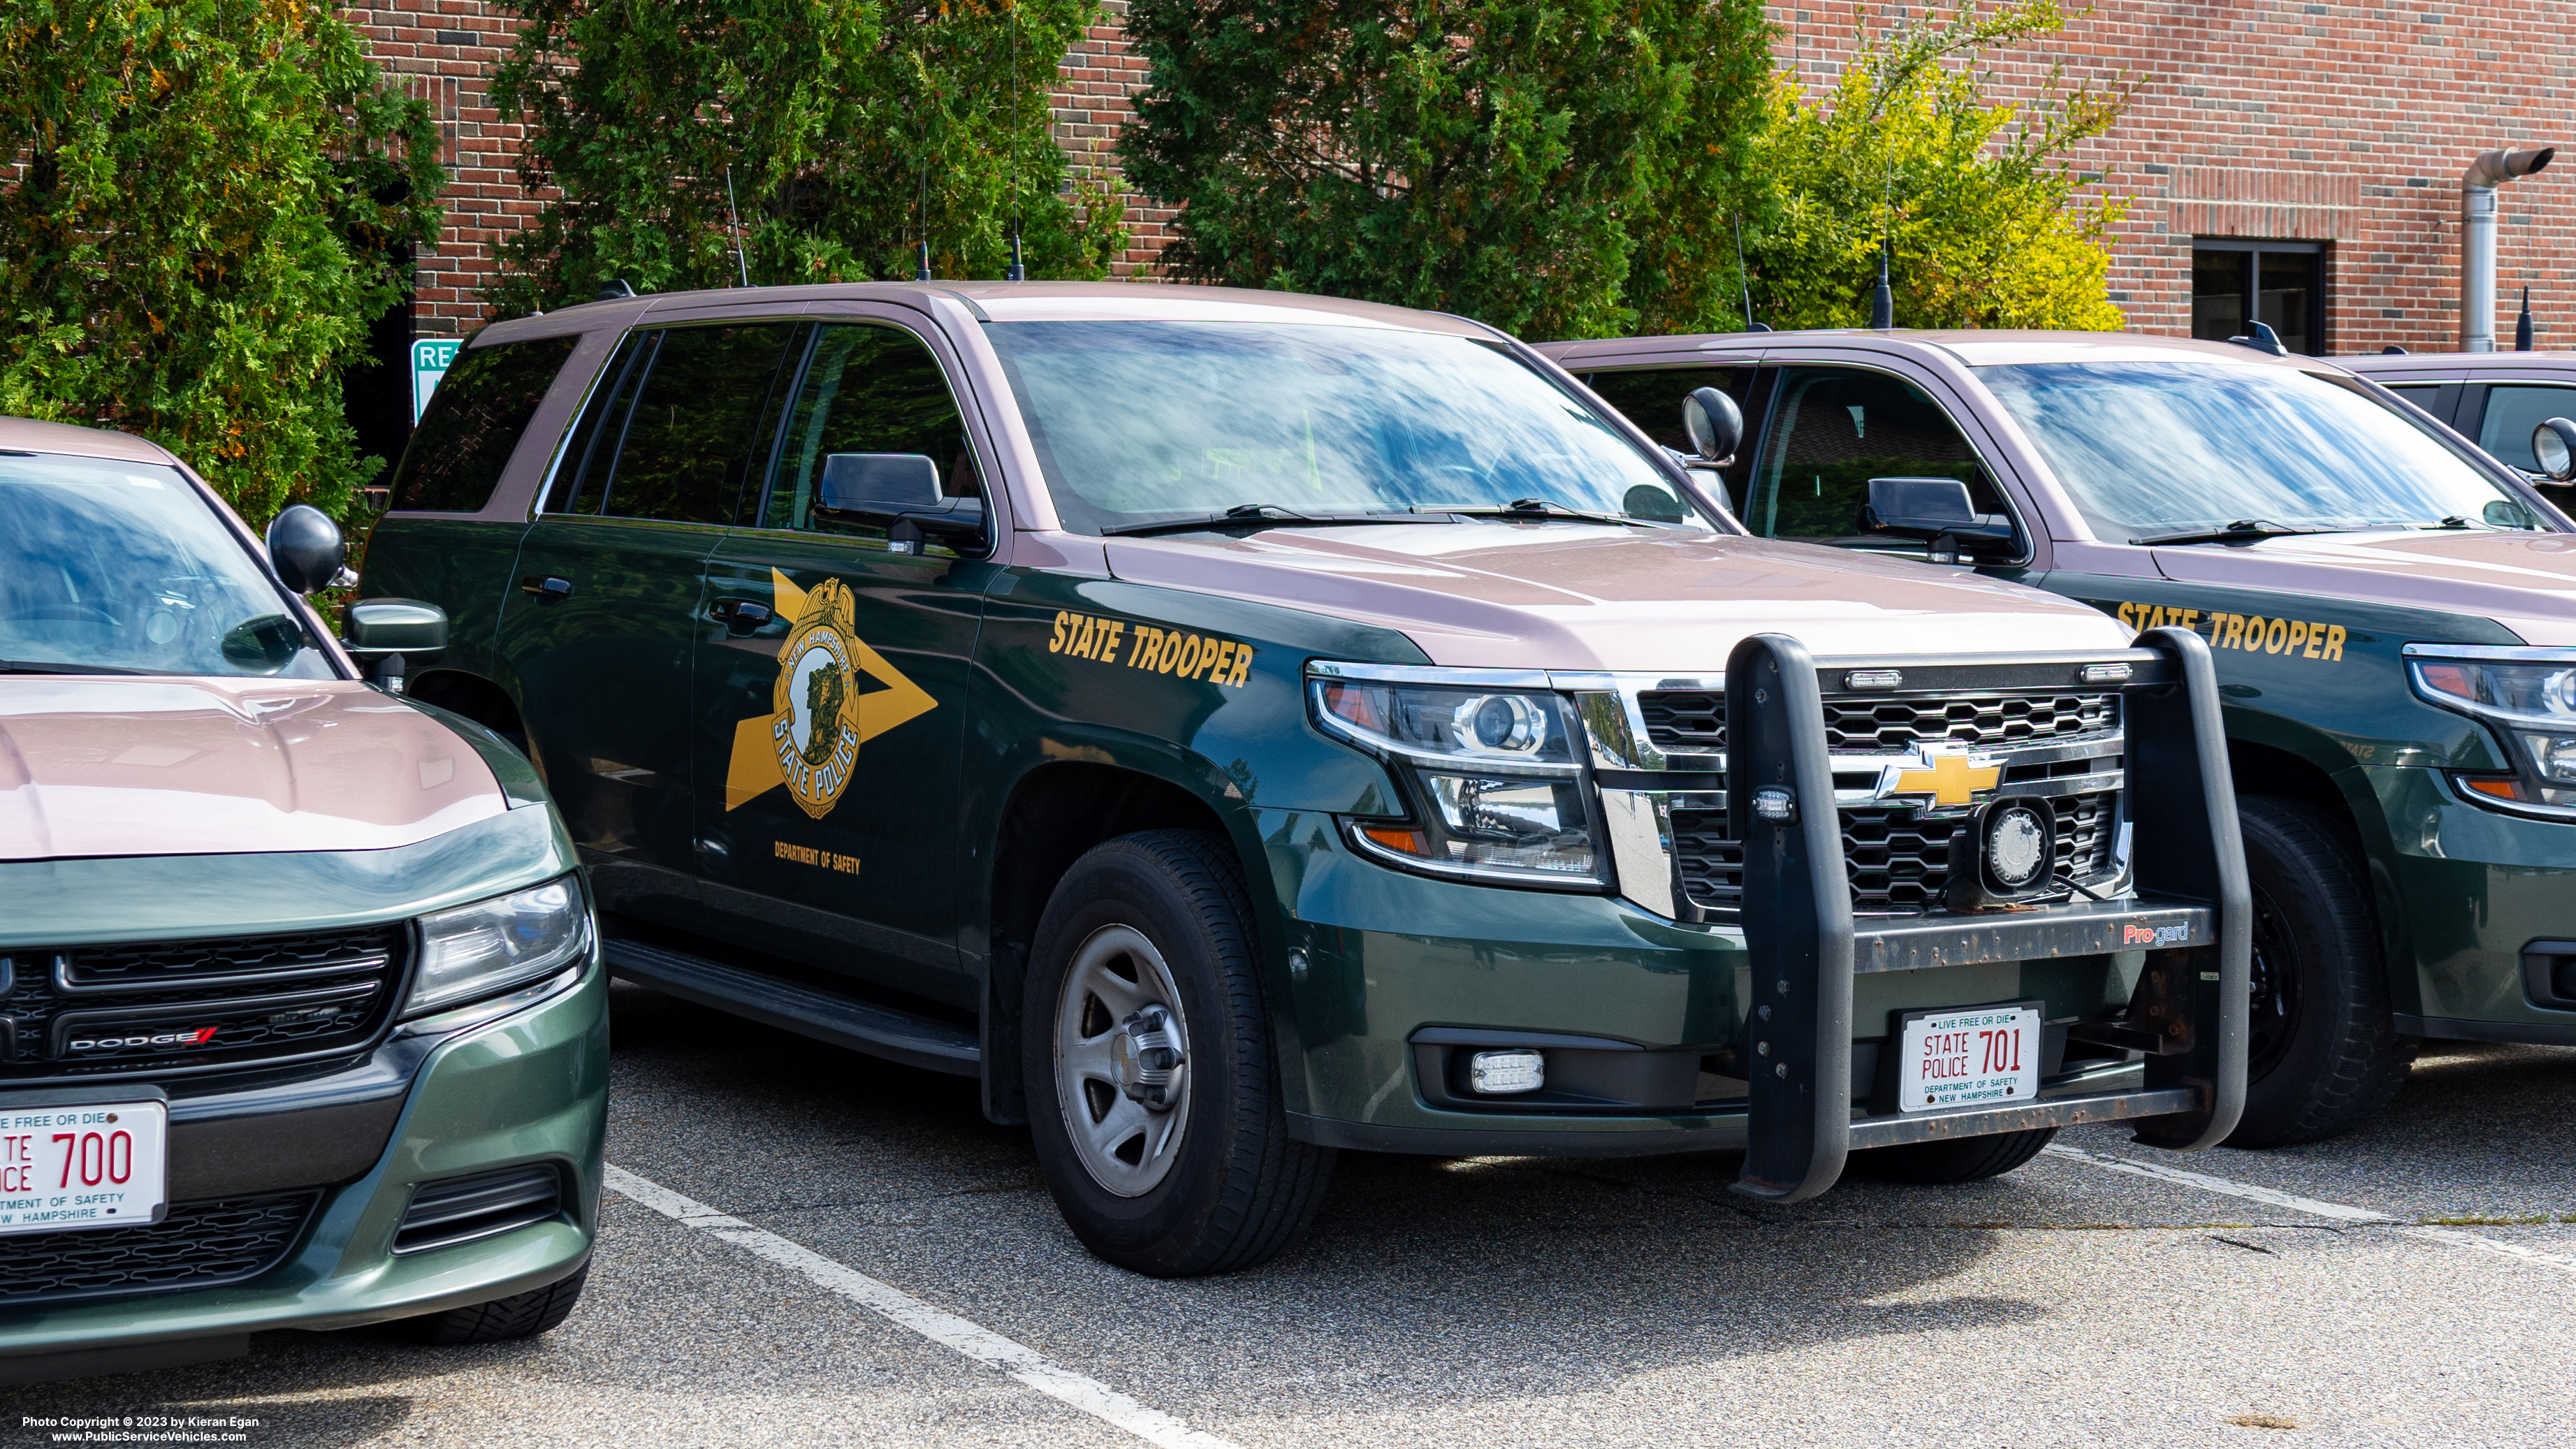 A photo  of New Hampshire State Police
            Cruiser 701, a 2019 Chevrolet Tahoe             taken by Kieran Egan